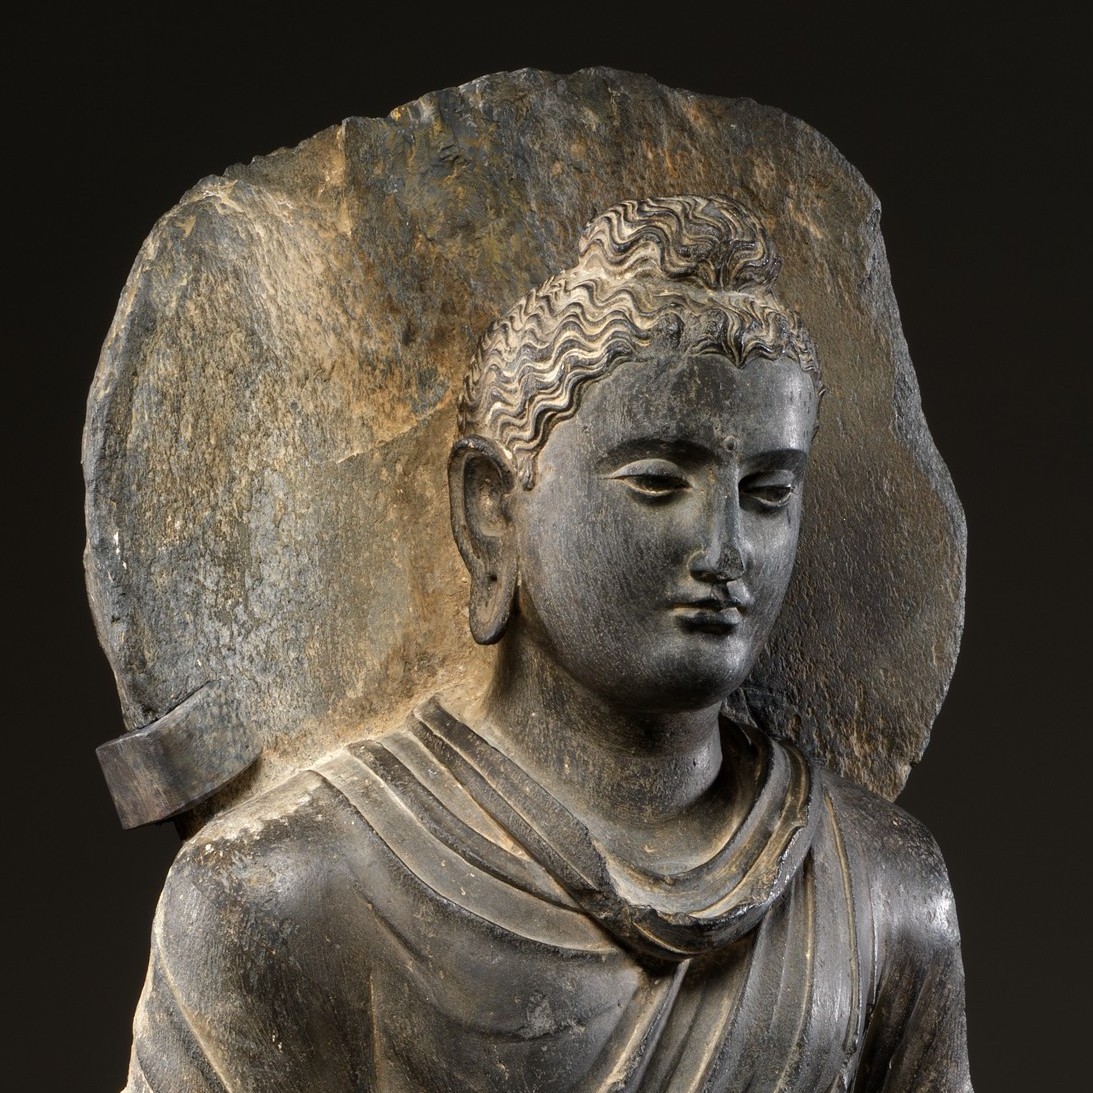 Buddha, 3rd century Pakistan, Khyber-Pakhtunkhwa province, Schist; H. 36 1/2 in. (92.7 cm); W. 11 in. (27.9 cm); D. 5 1/2 in. (14 cm) The Metropolitan Museum of Art, New York, Purchase, Denise and Andrew Saul Gift, in honor of Maxwell K. Hearn, 2014 (2014.188) http://www.metmuseum.org/Collections/search-the-collections/646117